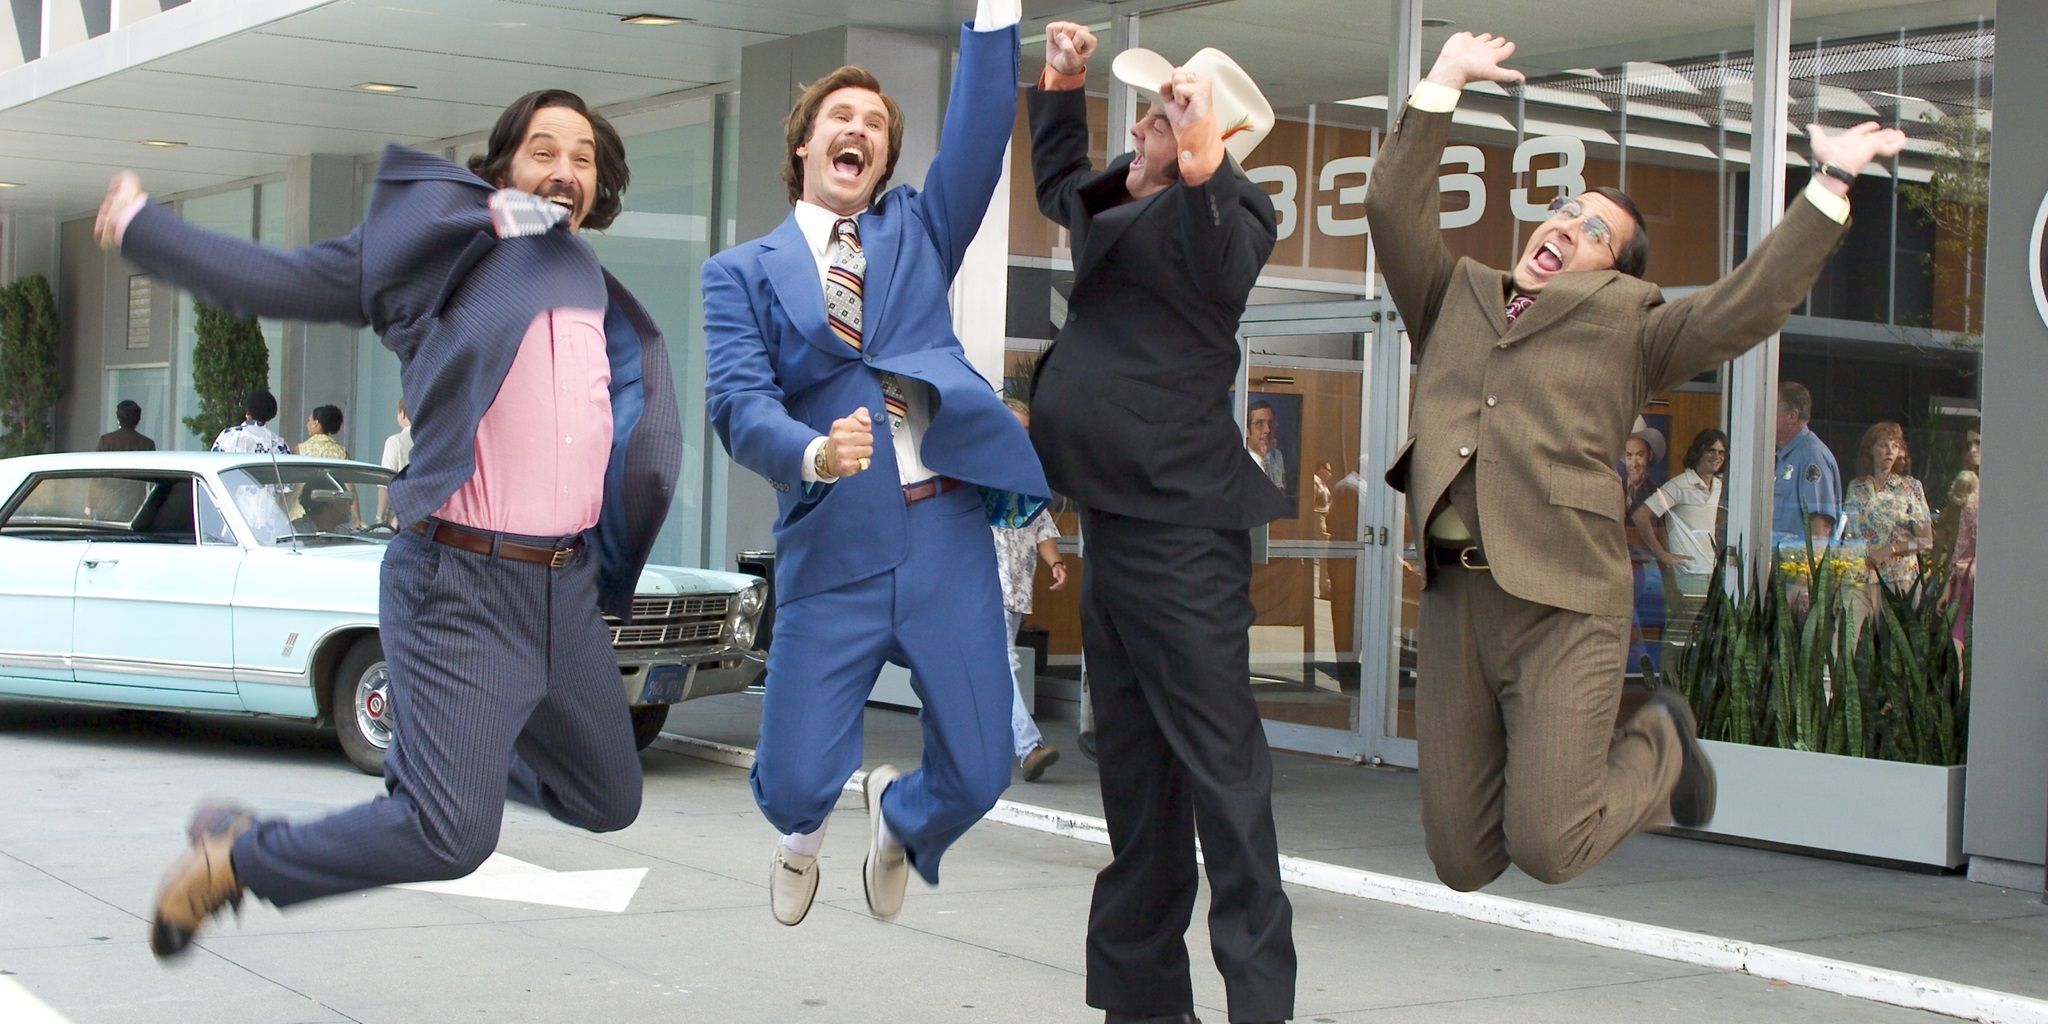 Ron and the news team in Anchorman